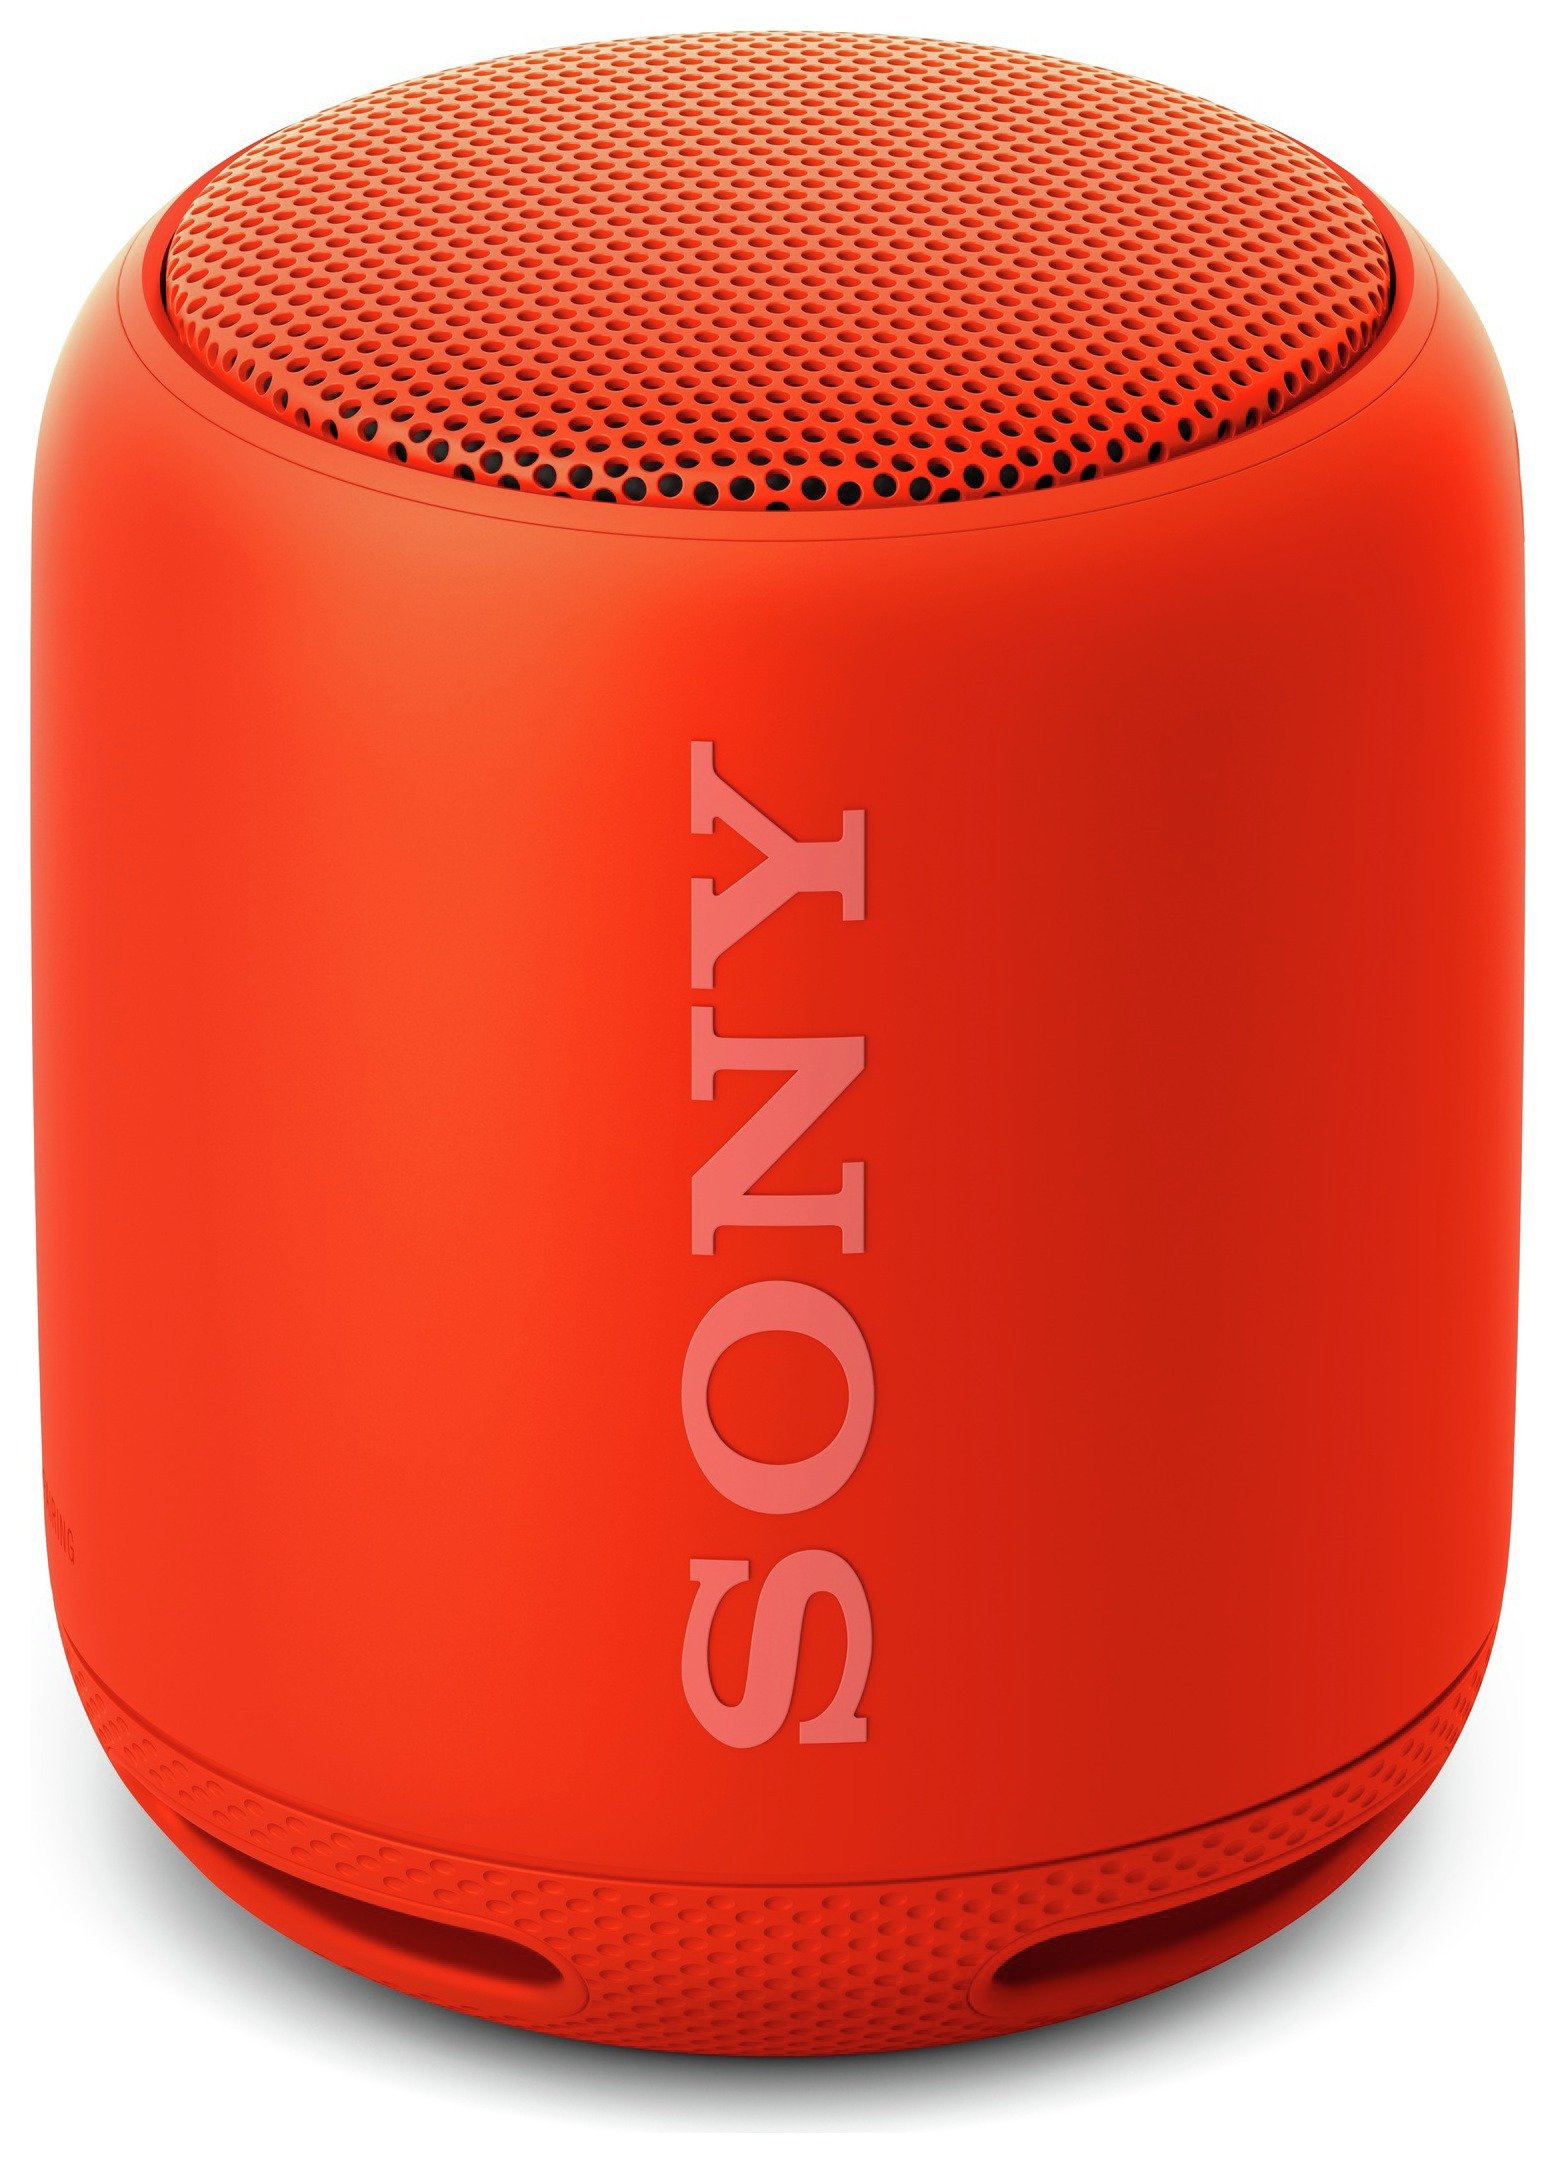 sony-srs-xb10-portable-wireless-speaker-red-review-review-electronics